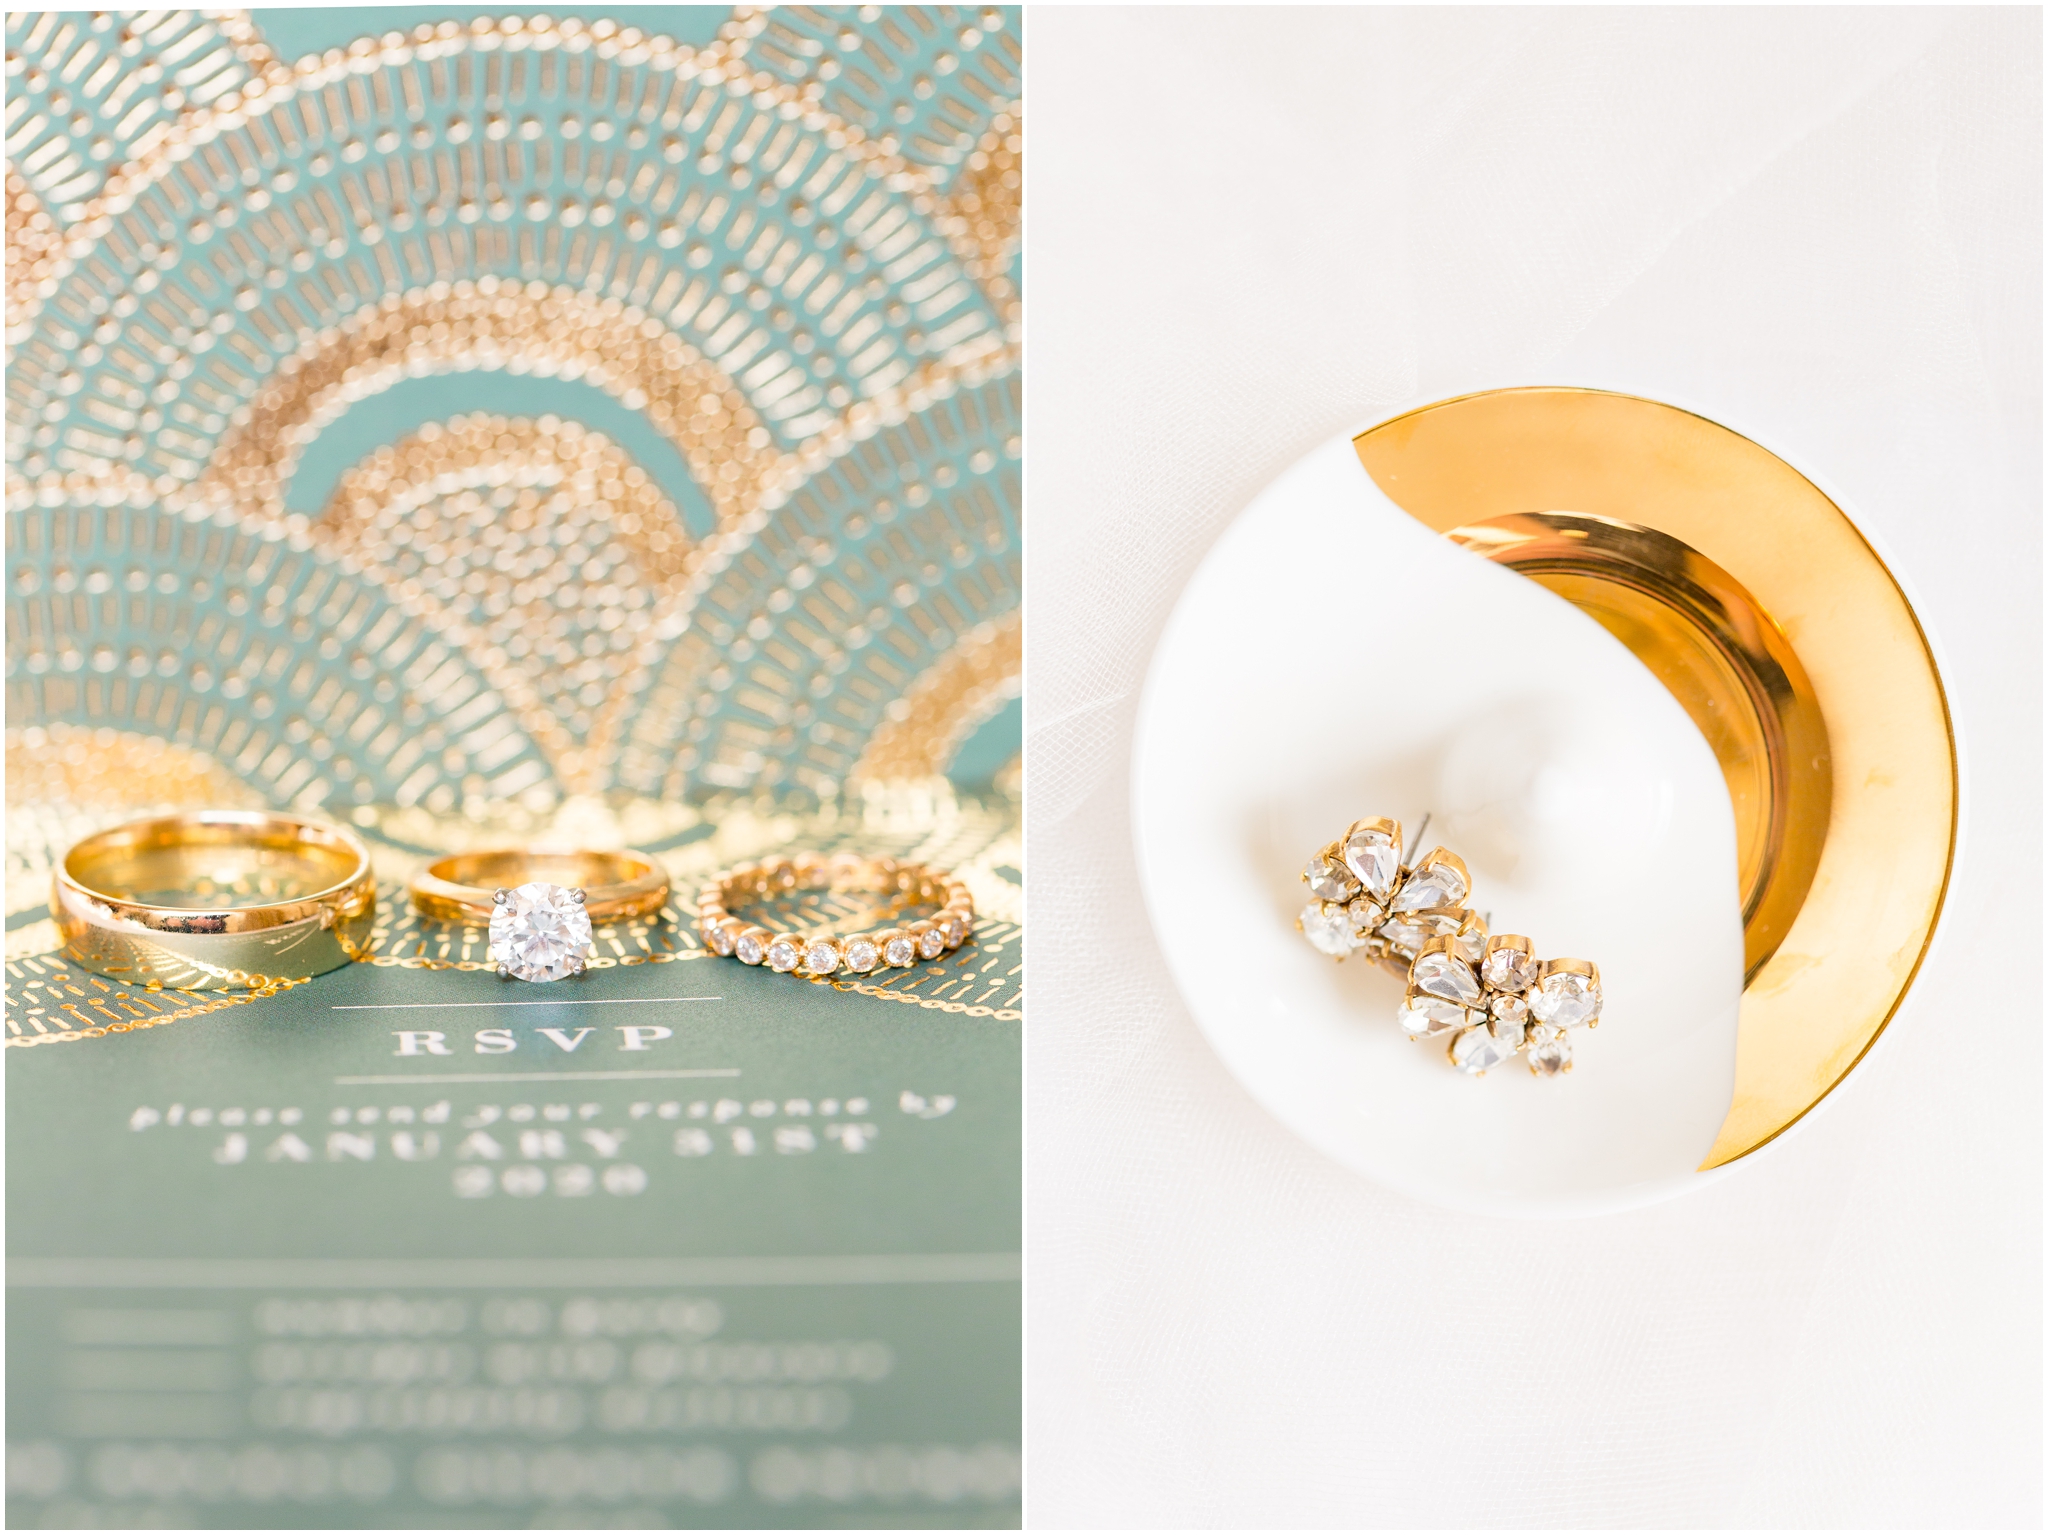 Glamorous gatsby style wedding at the Jefferson Hotel DC was captured by DC wedding photographer Taylor Rose Photography. Includes gold wedding bands and gold wedding invitations.